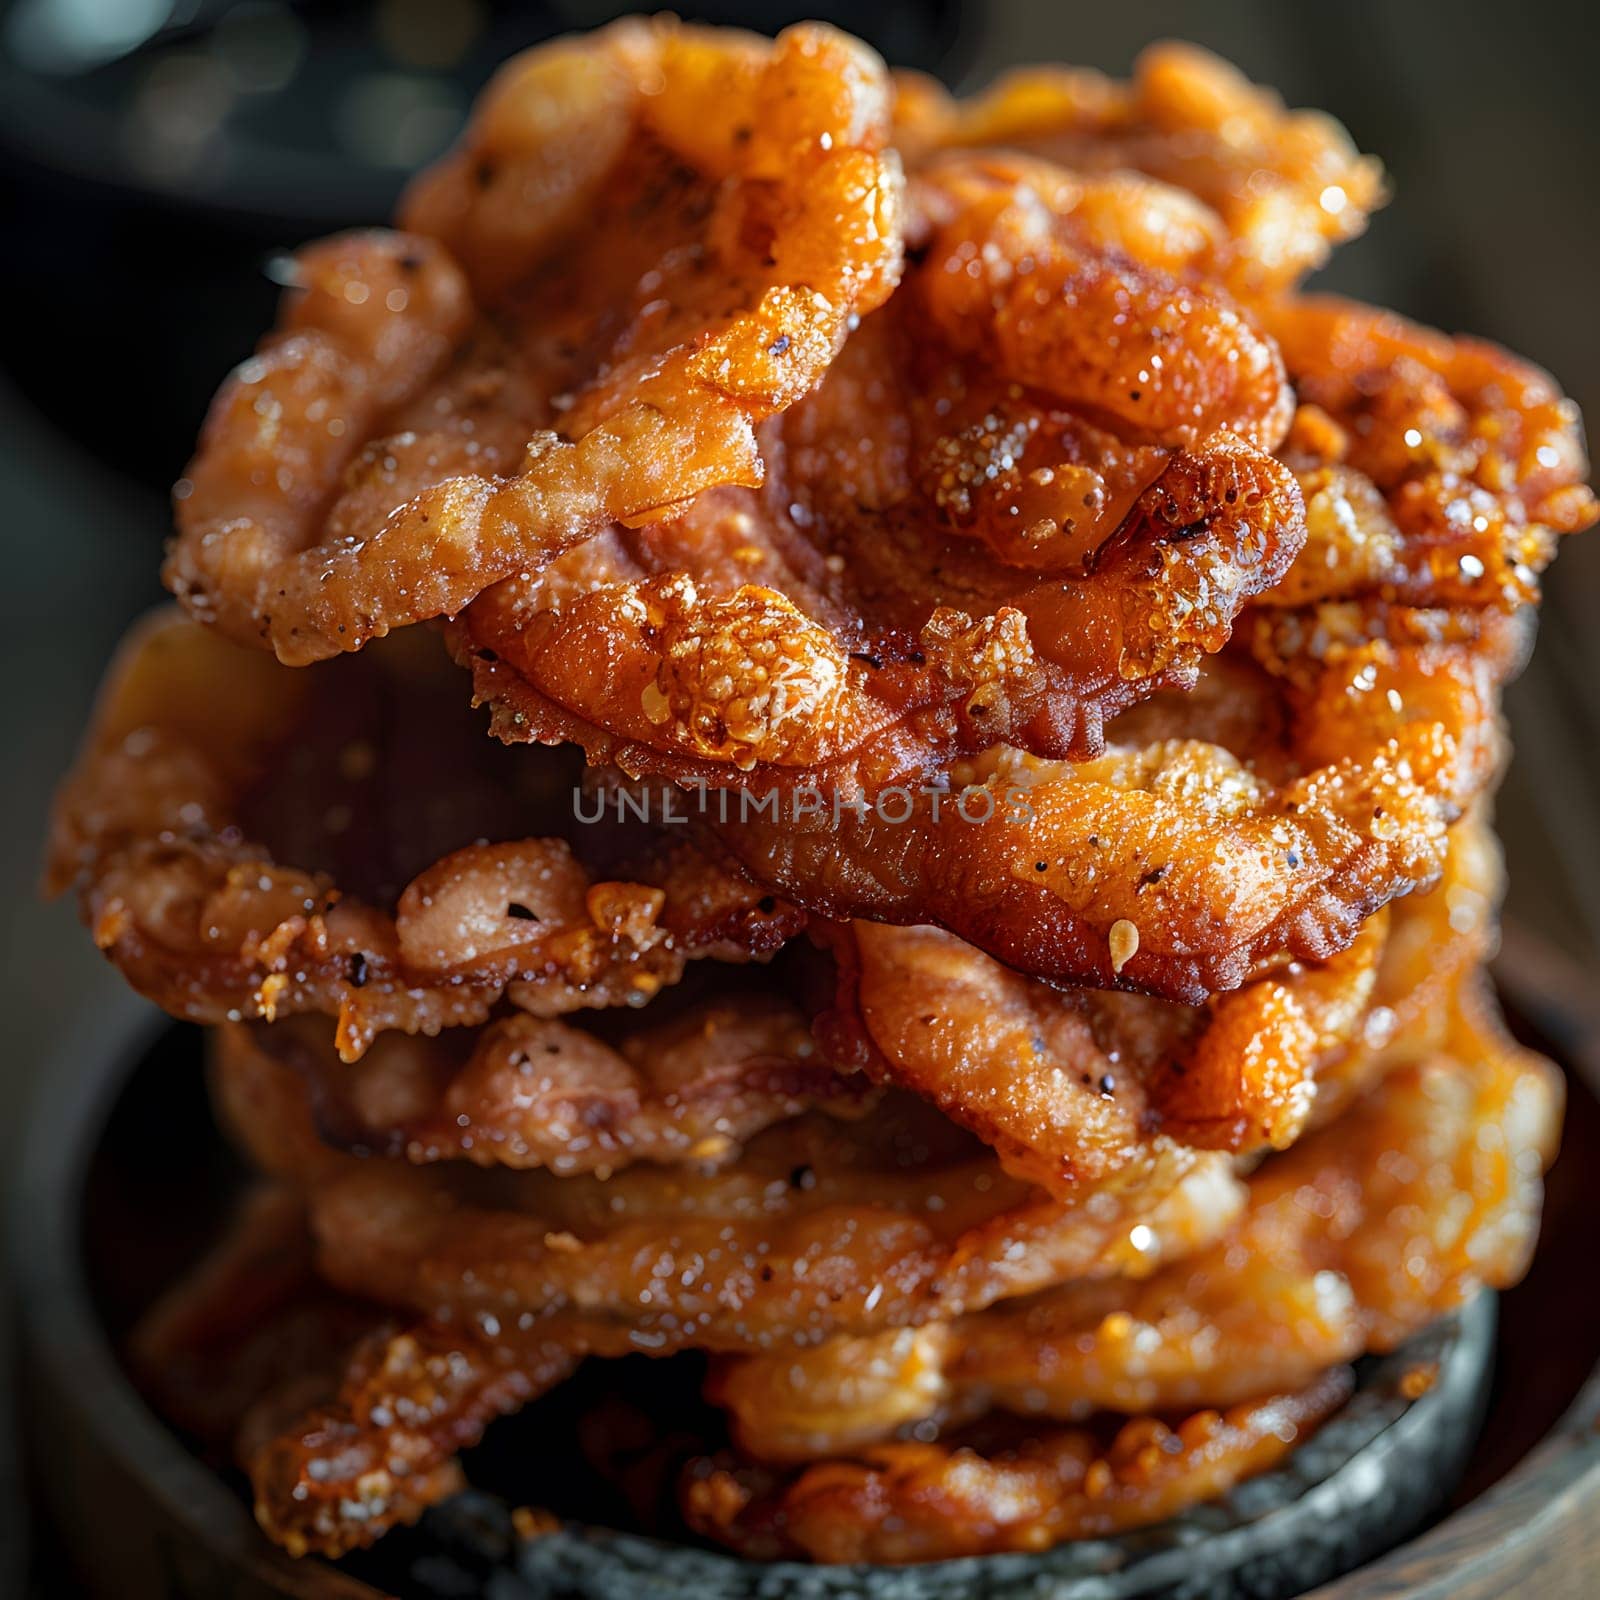 A closeup of a bowl filled with a stack of deepfried food, showcasing a variety of fast food items. This dish is a popular cuisine known for its crispy texture and savory flavors